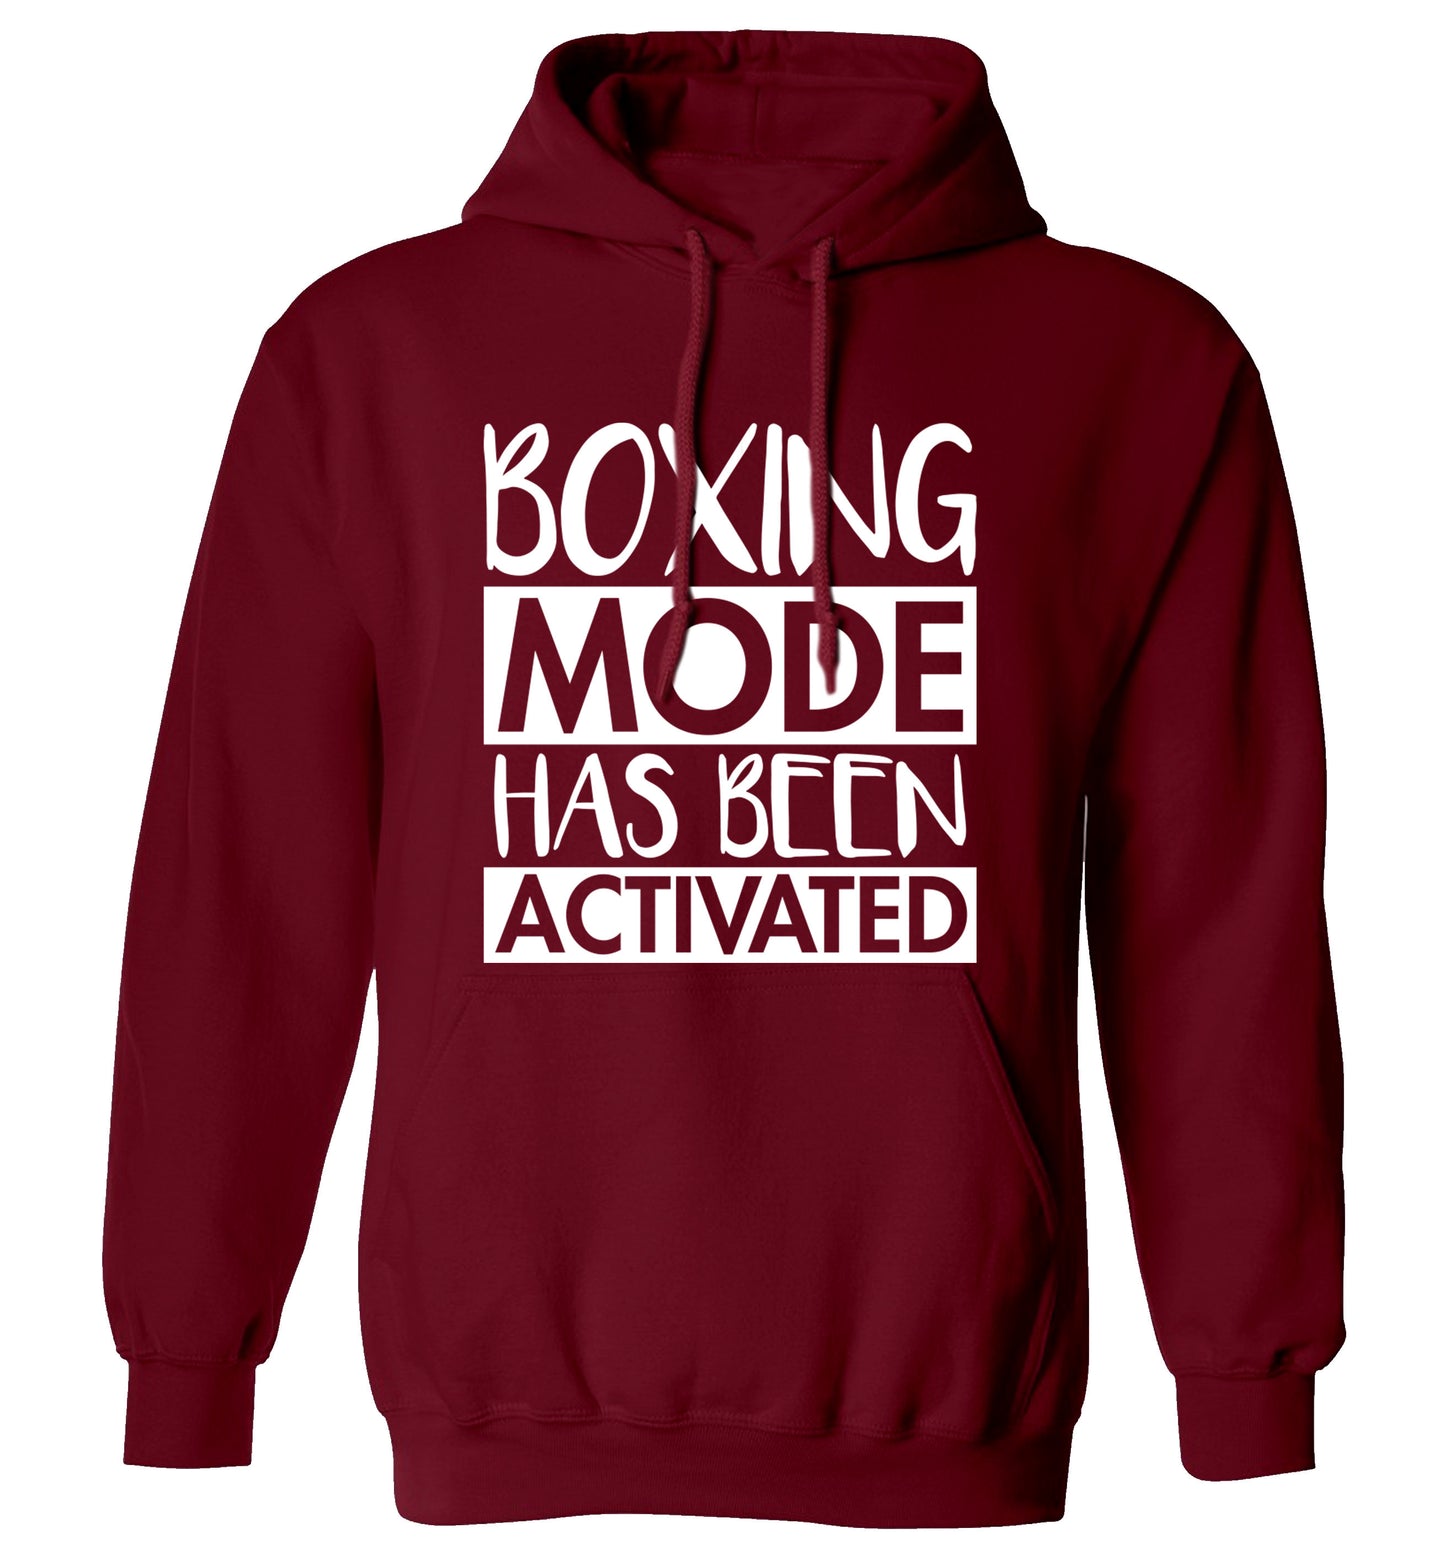 Boxing mode activated adults unisex maroon hoodie 2XL